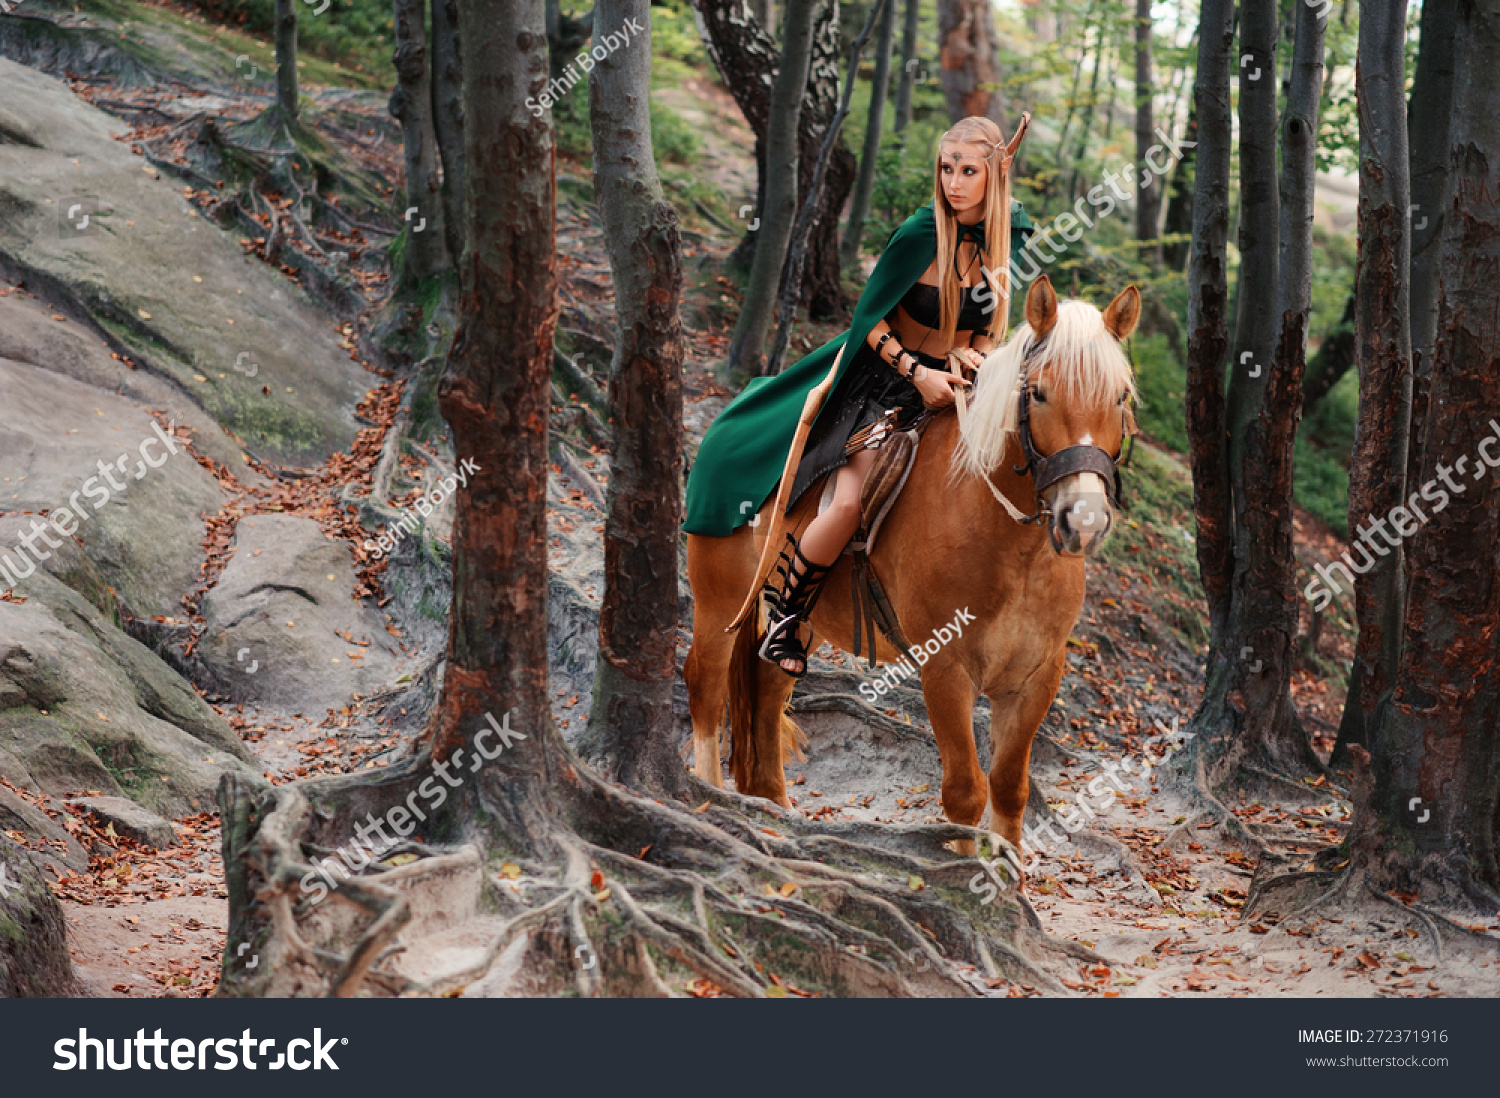 Sexy Woman Elf Warrior On Horseback In The Woods Stock Photo 272371916 ...